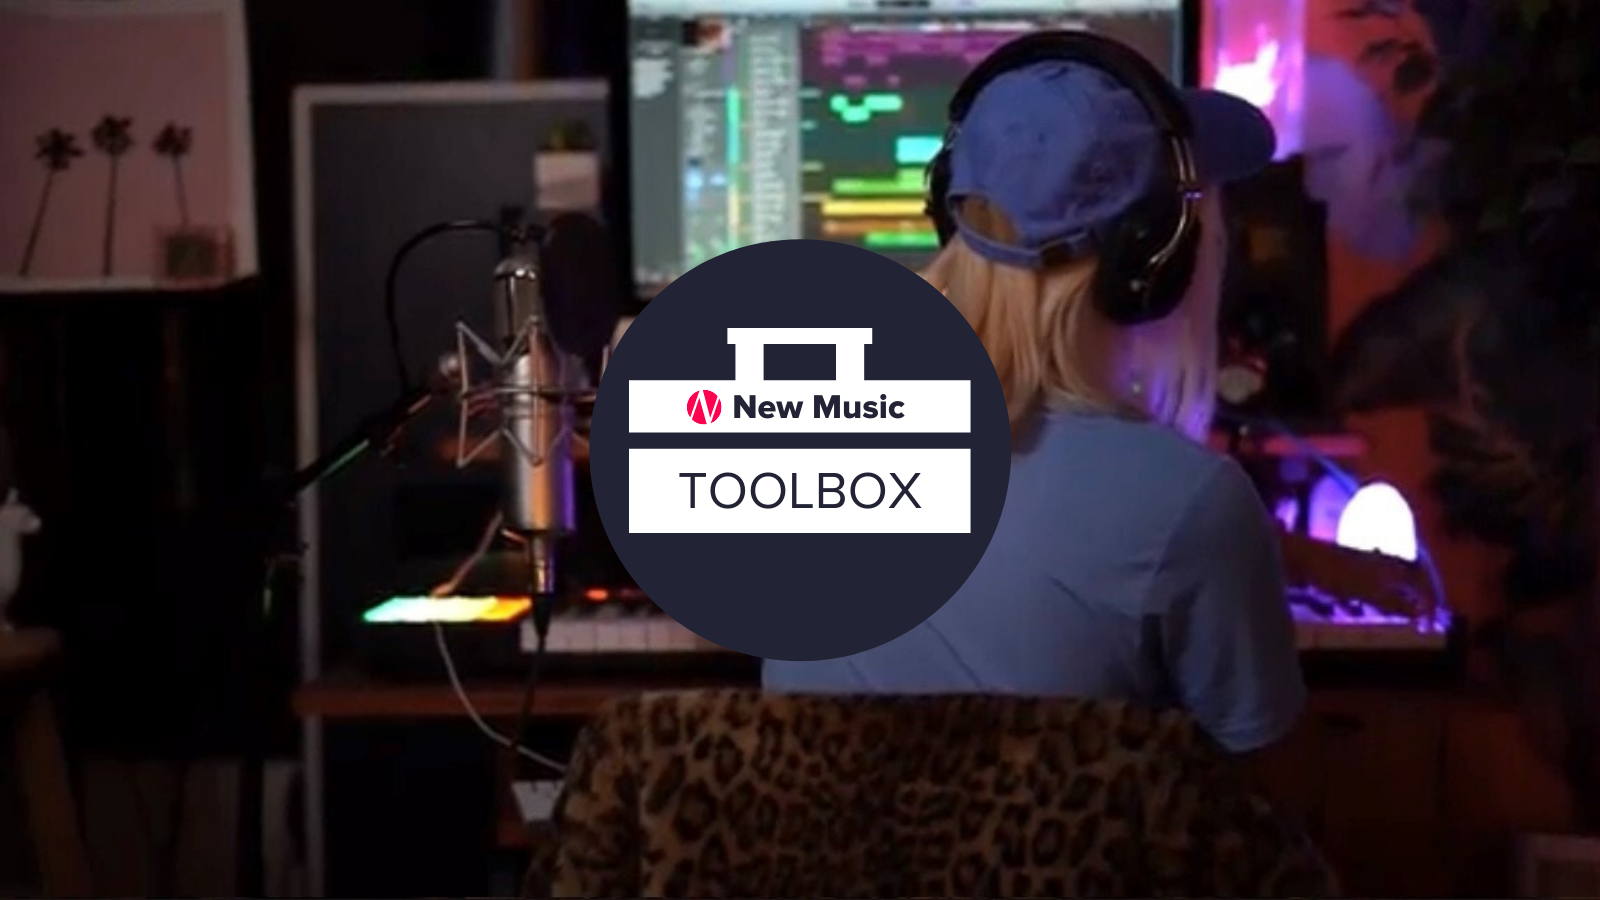 Alexandra Petkovski at her music work station overlayed with the New Music Toolbox logo.